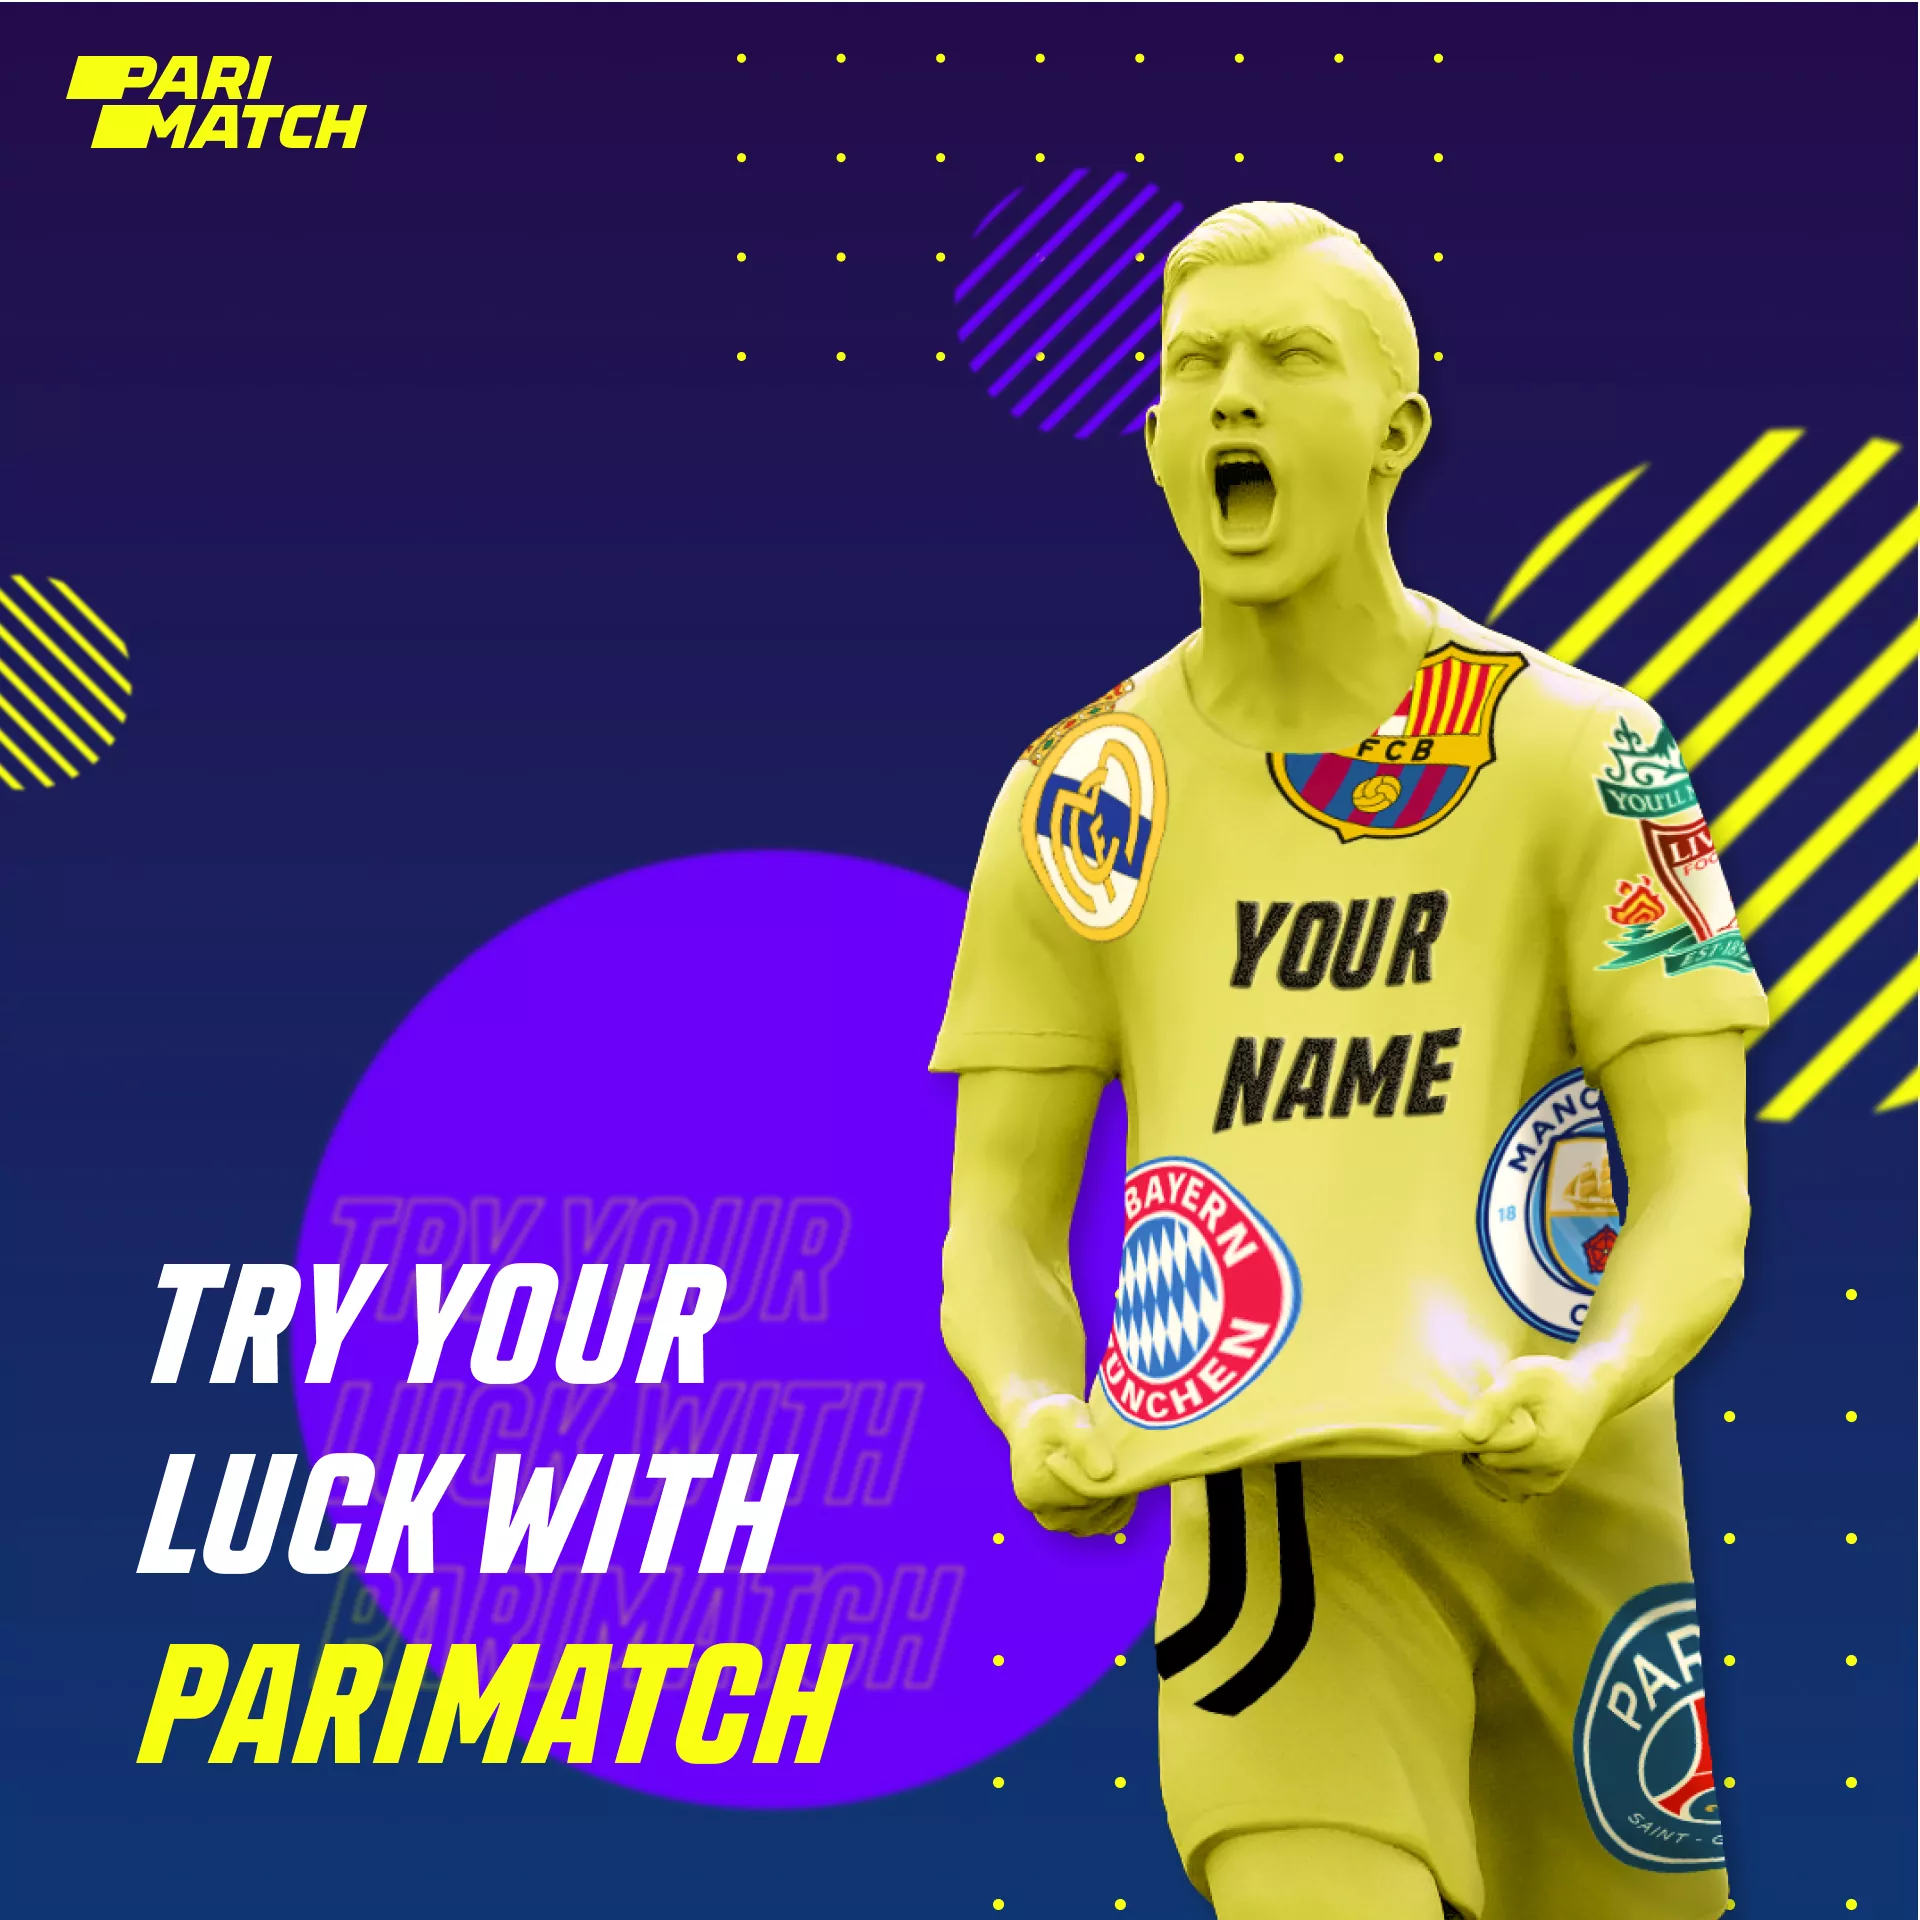 Register a parimatch account and start betting on sports or cyber sports.